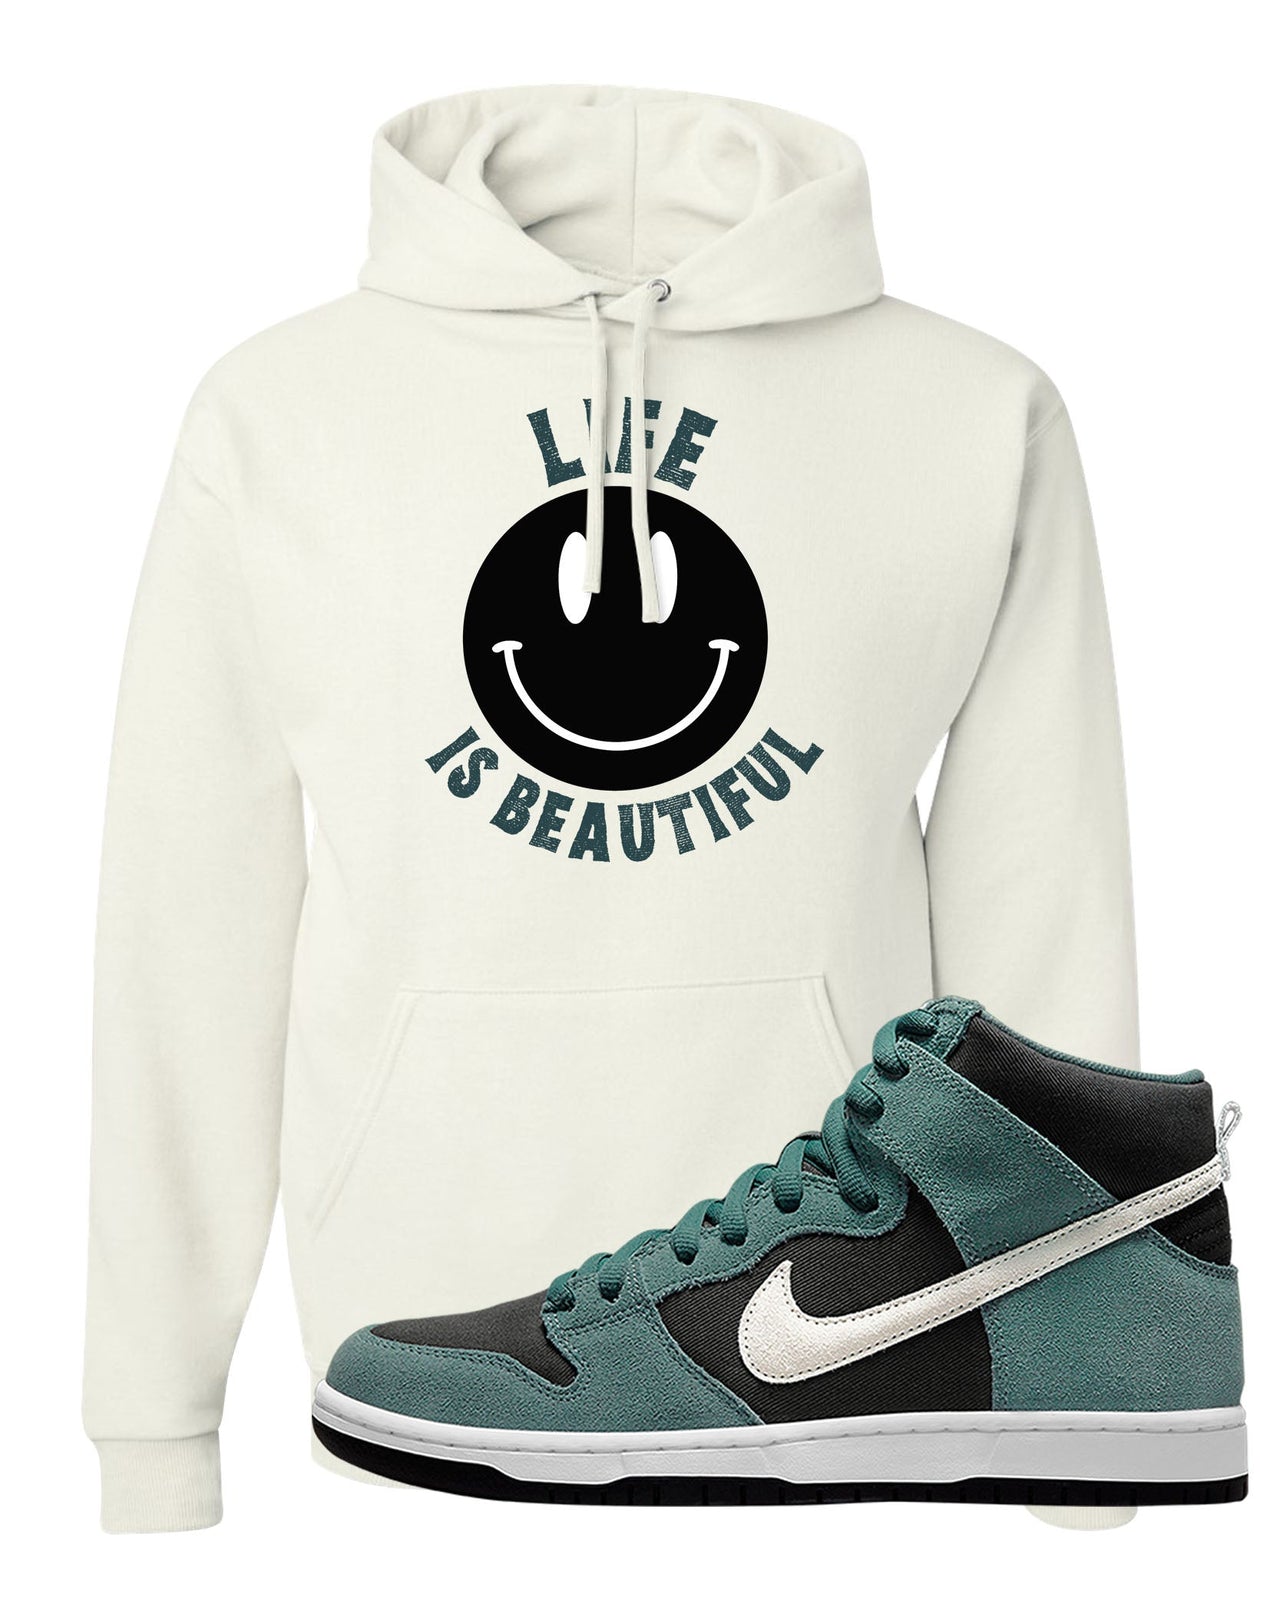 Green Suede High Dunks Hoodie | Smile Life Is Beautiful, White